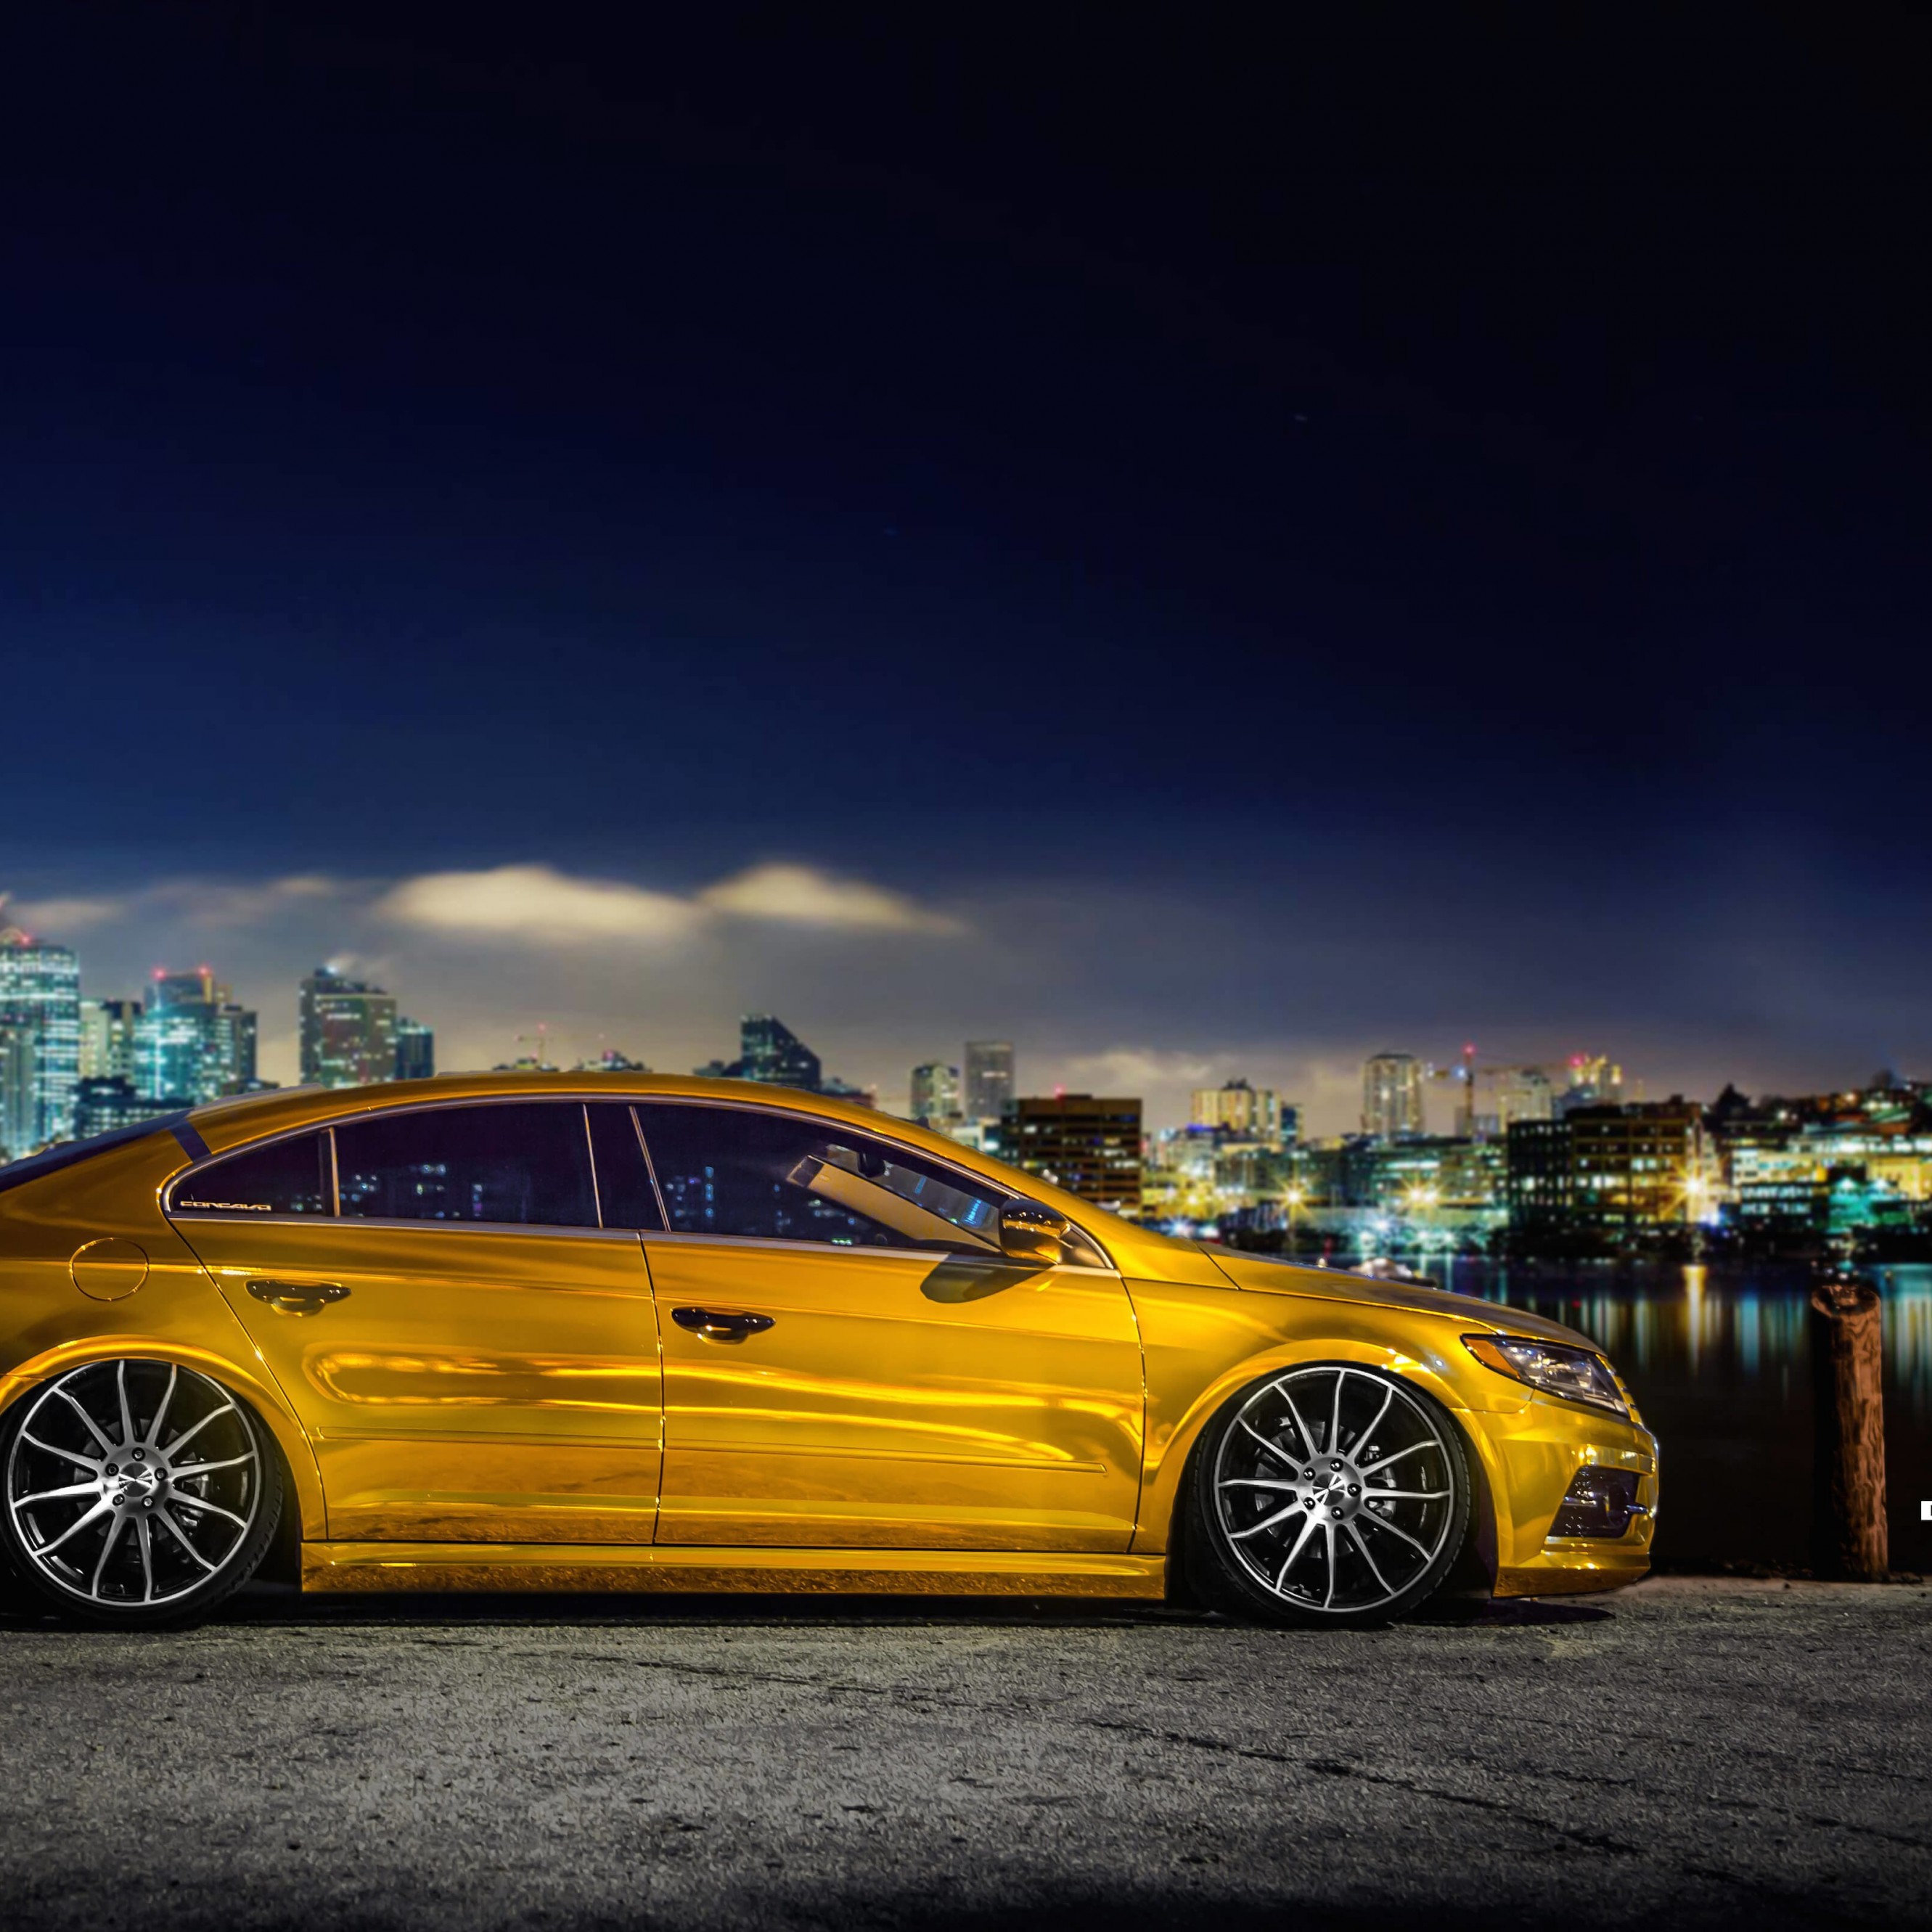 Volkswagen CC on CW-12 Concave Wheels Wallpaper for Apple iPhone 6 Plus